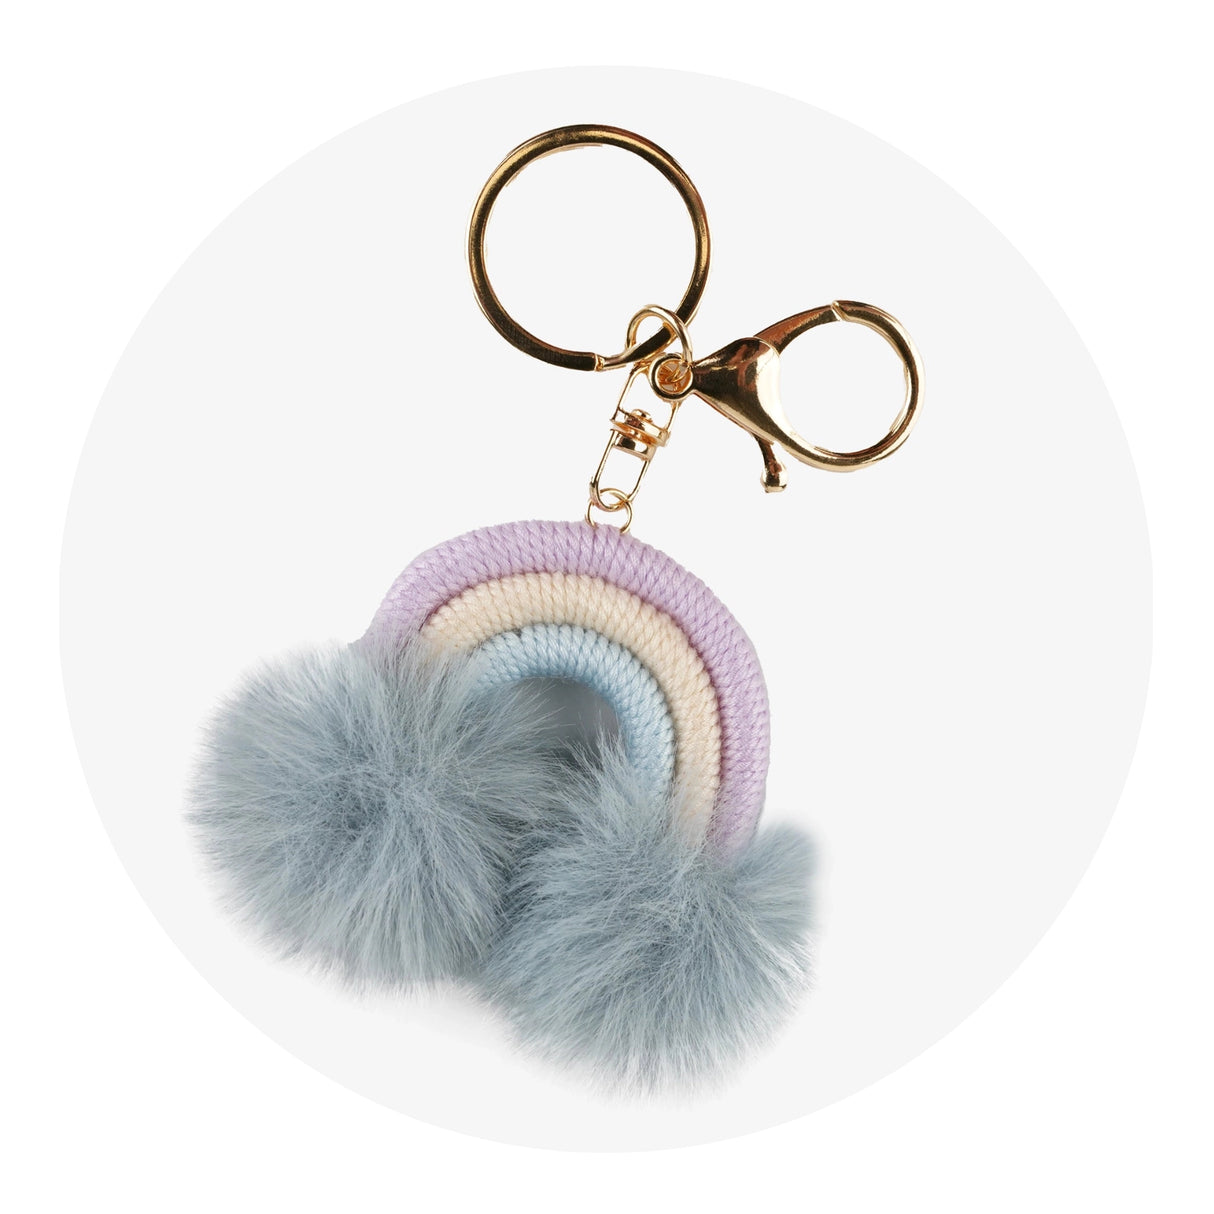 Keychain Woven Rainbow Pom with Lobster Claw - Light Purple & Pastel